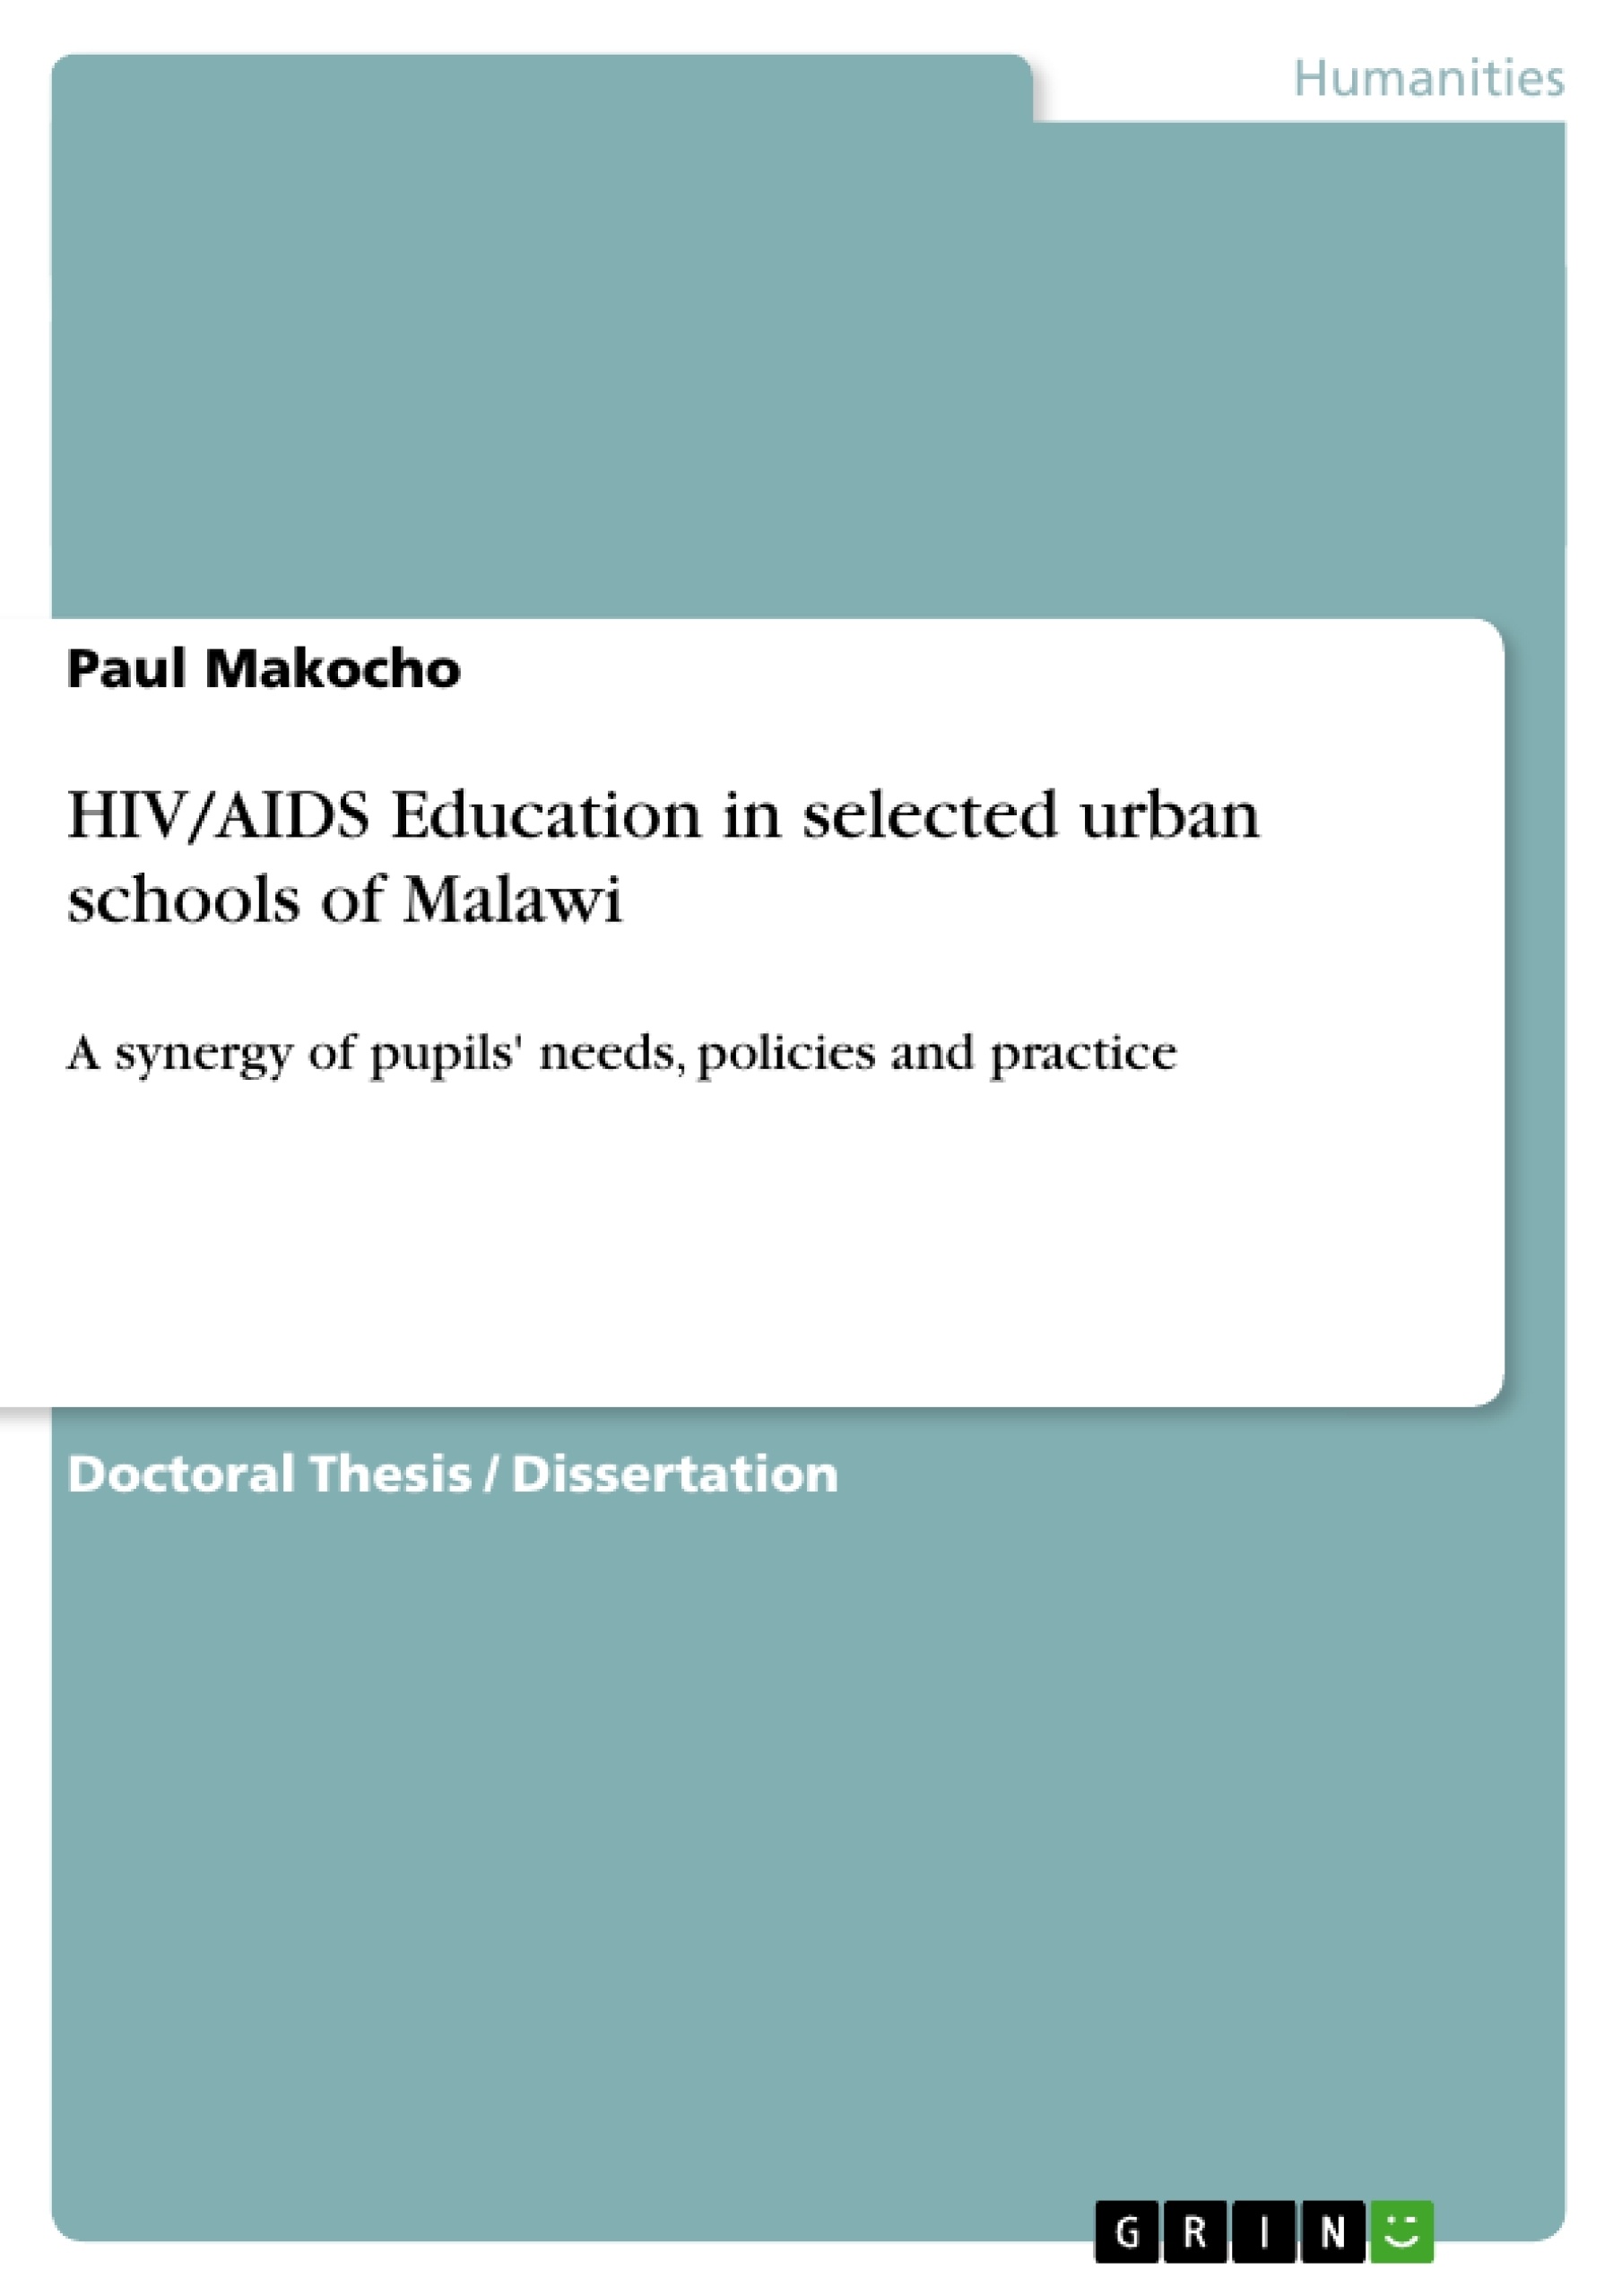 Title: HIV/AIDS Education in selected urban schools of Malawi